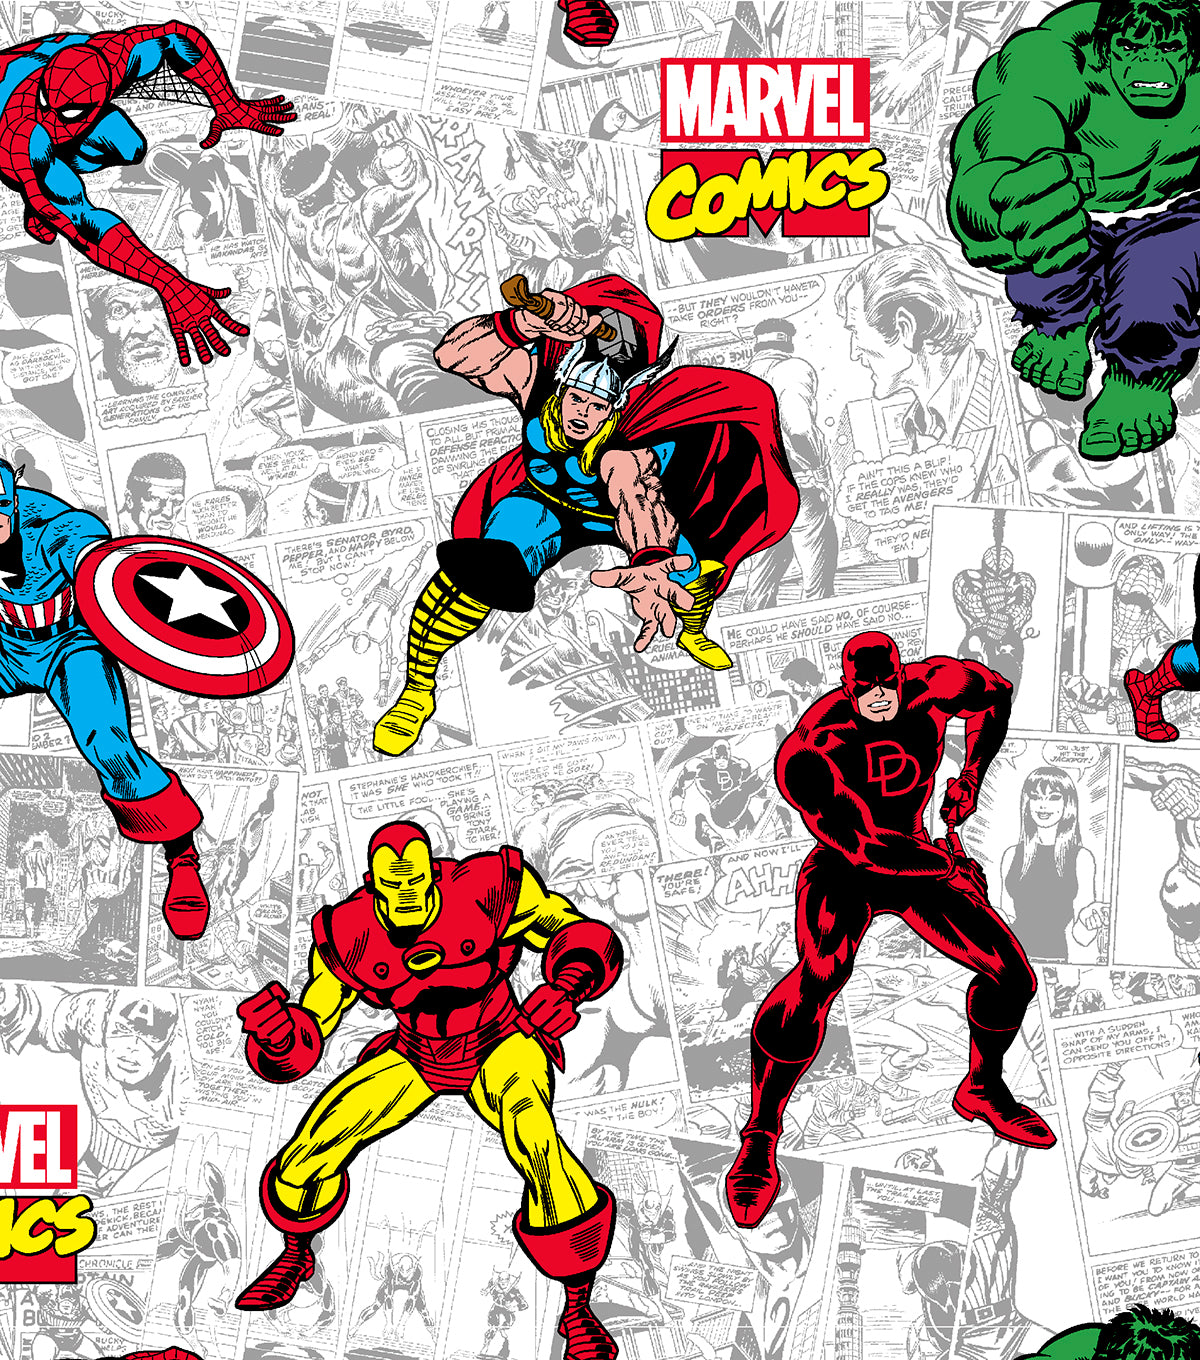 Marvel's Comic Book Action